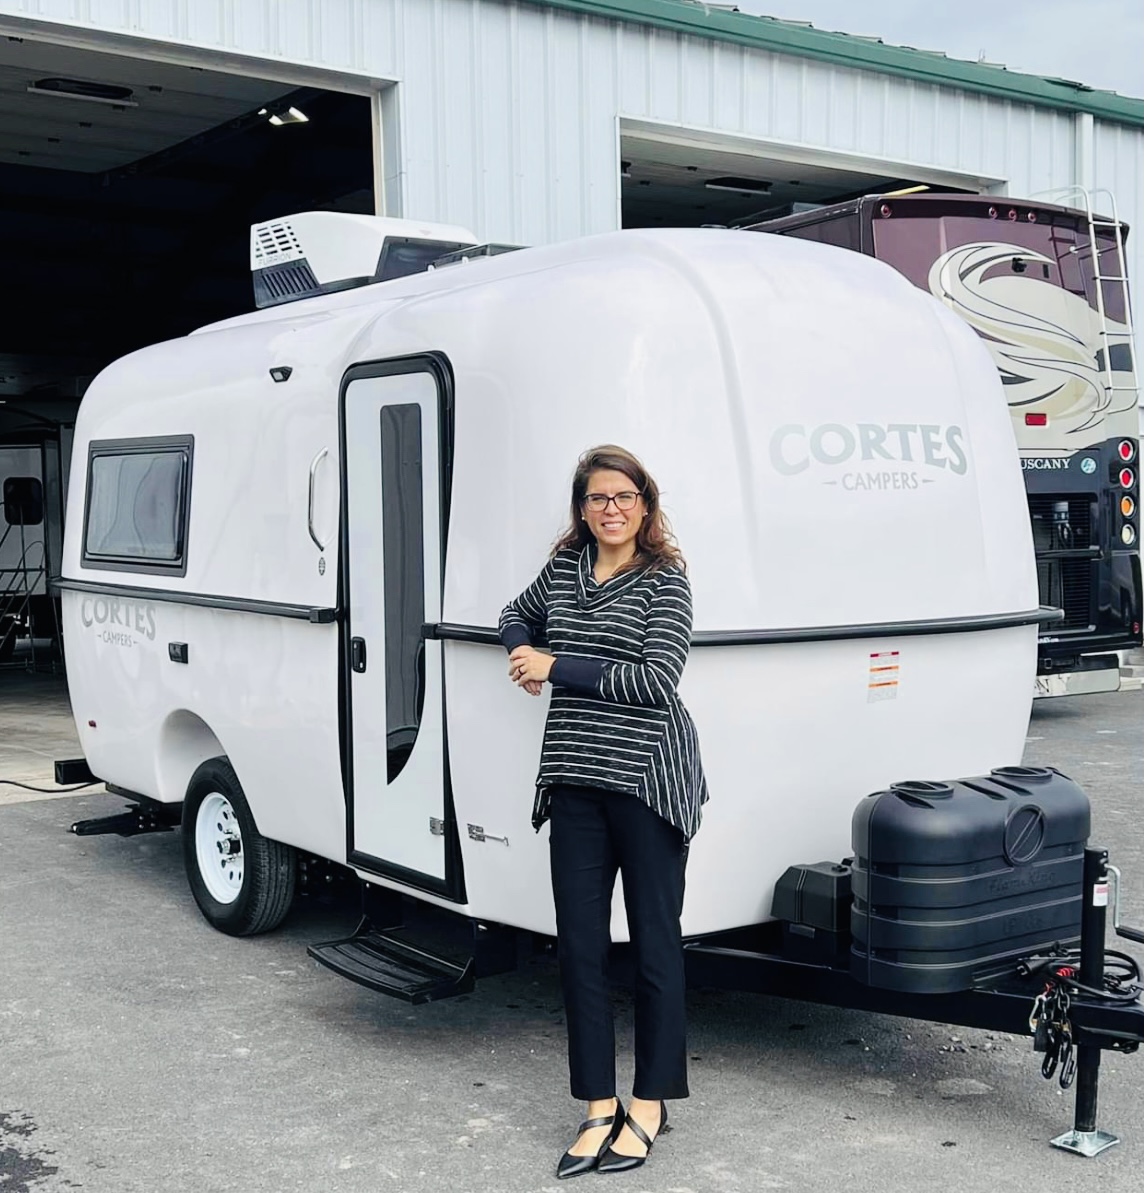 Cortes Campers sponsored the Hershey RV Show 2023 giveaway camper. The winner picked up their new Cortes 16 at Liberty RV on September 28th.